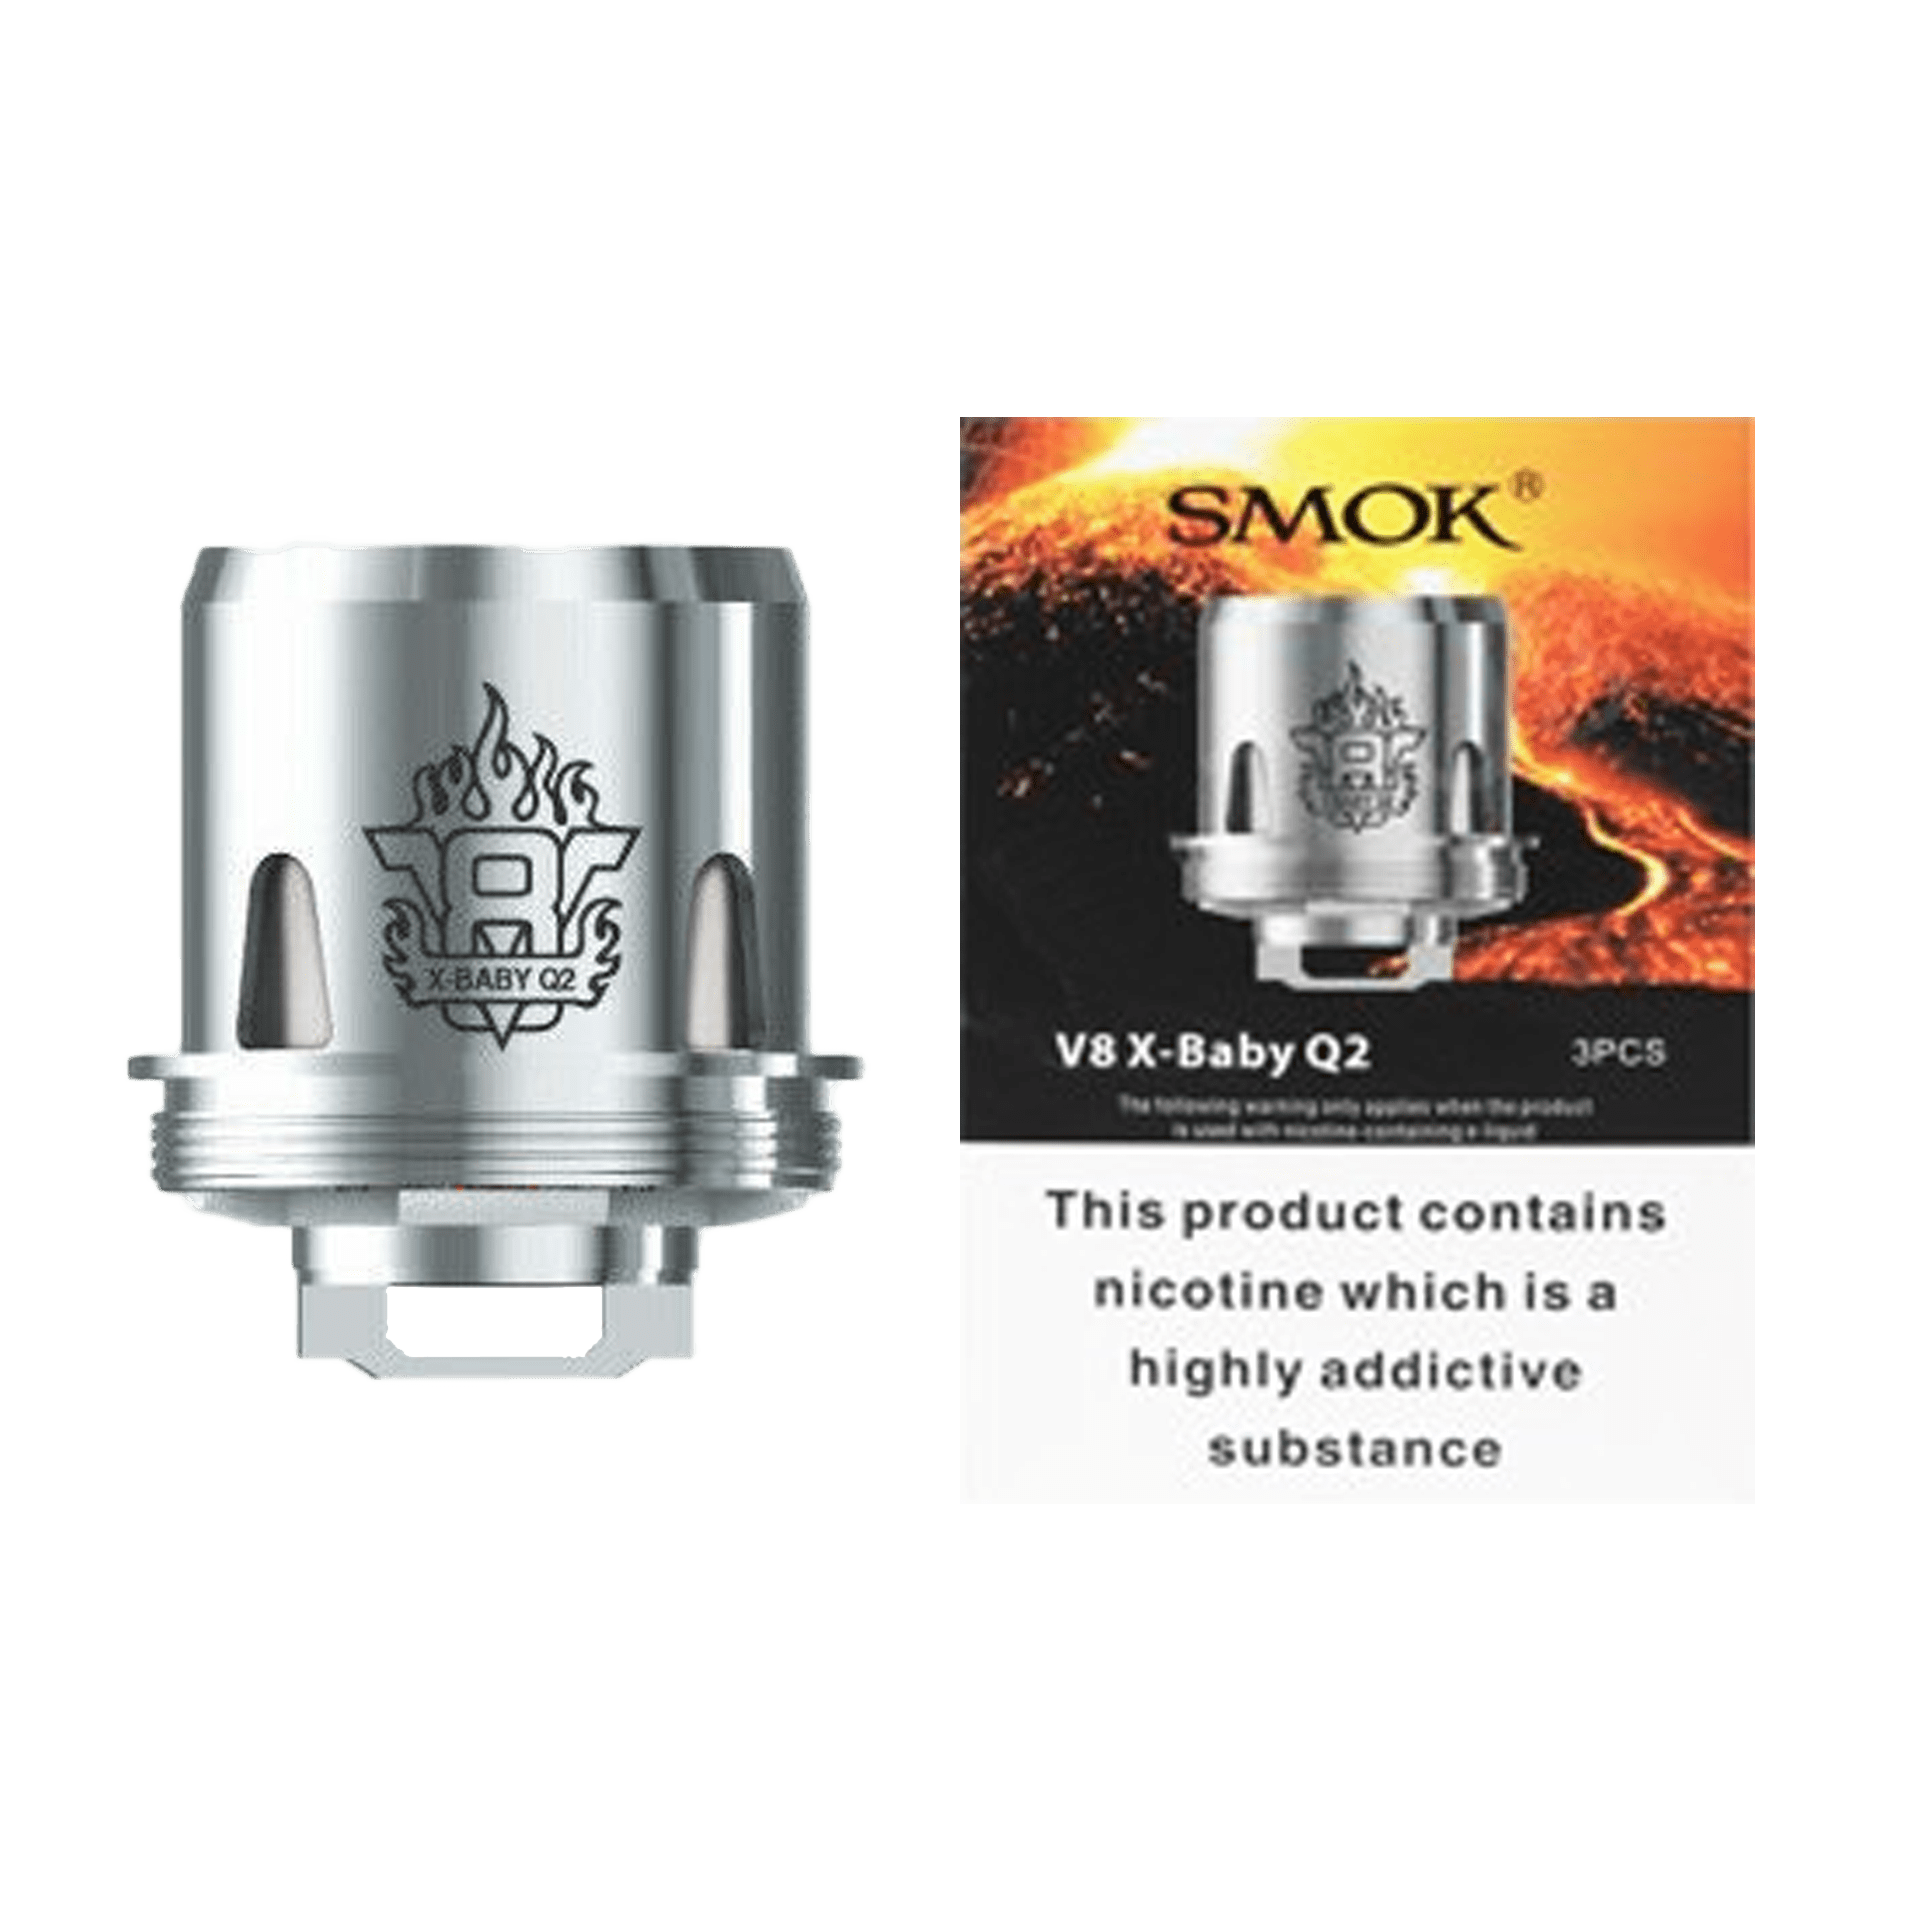 Smok V8 X-Baby Q2 Replacement Coils